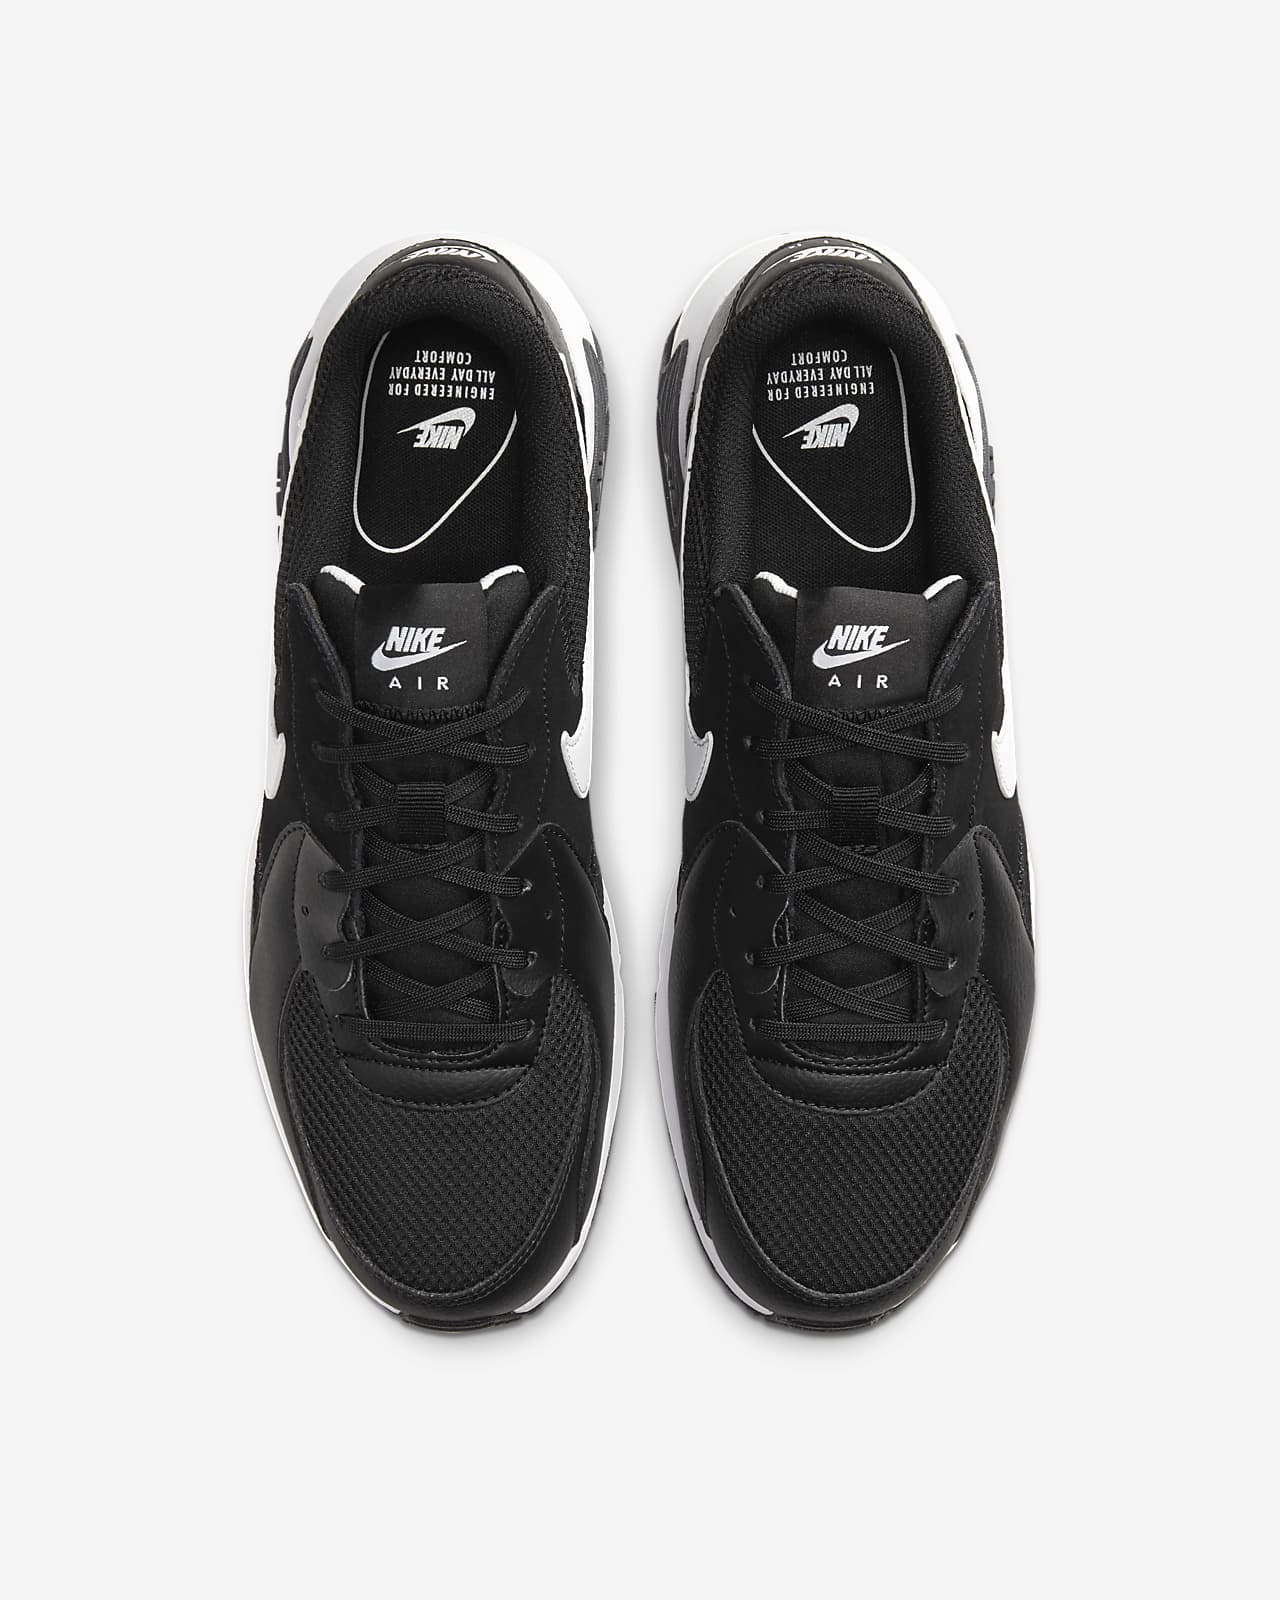 nike air all day everyday comfort